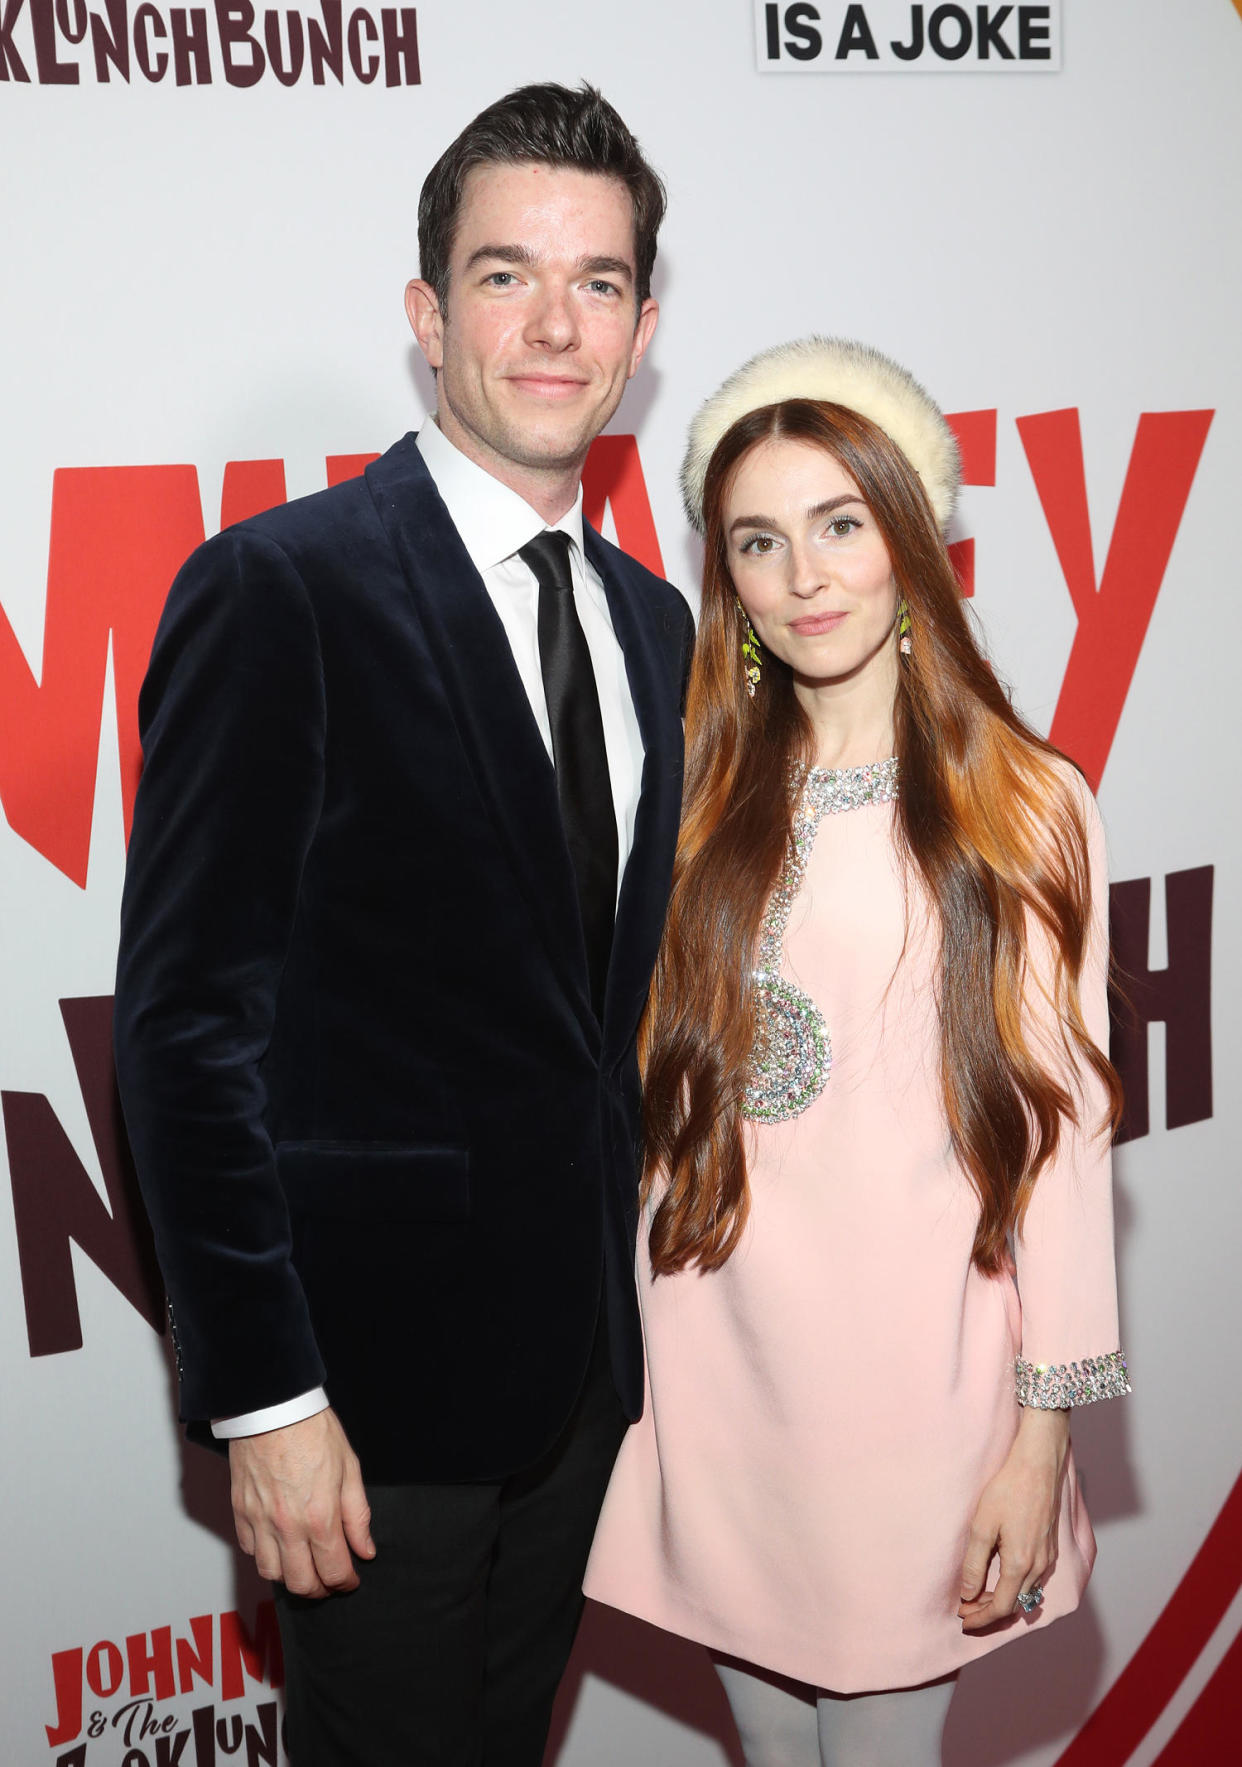 John Mulaney and Annamarie Tendler (Manny Carabel / Getty Images)